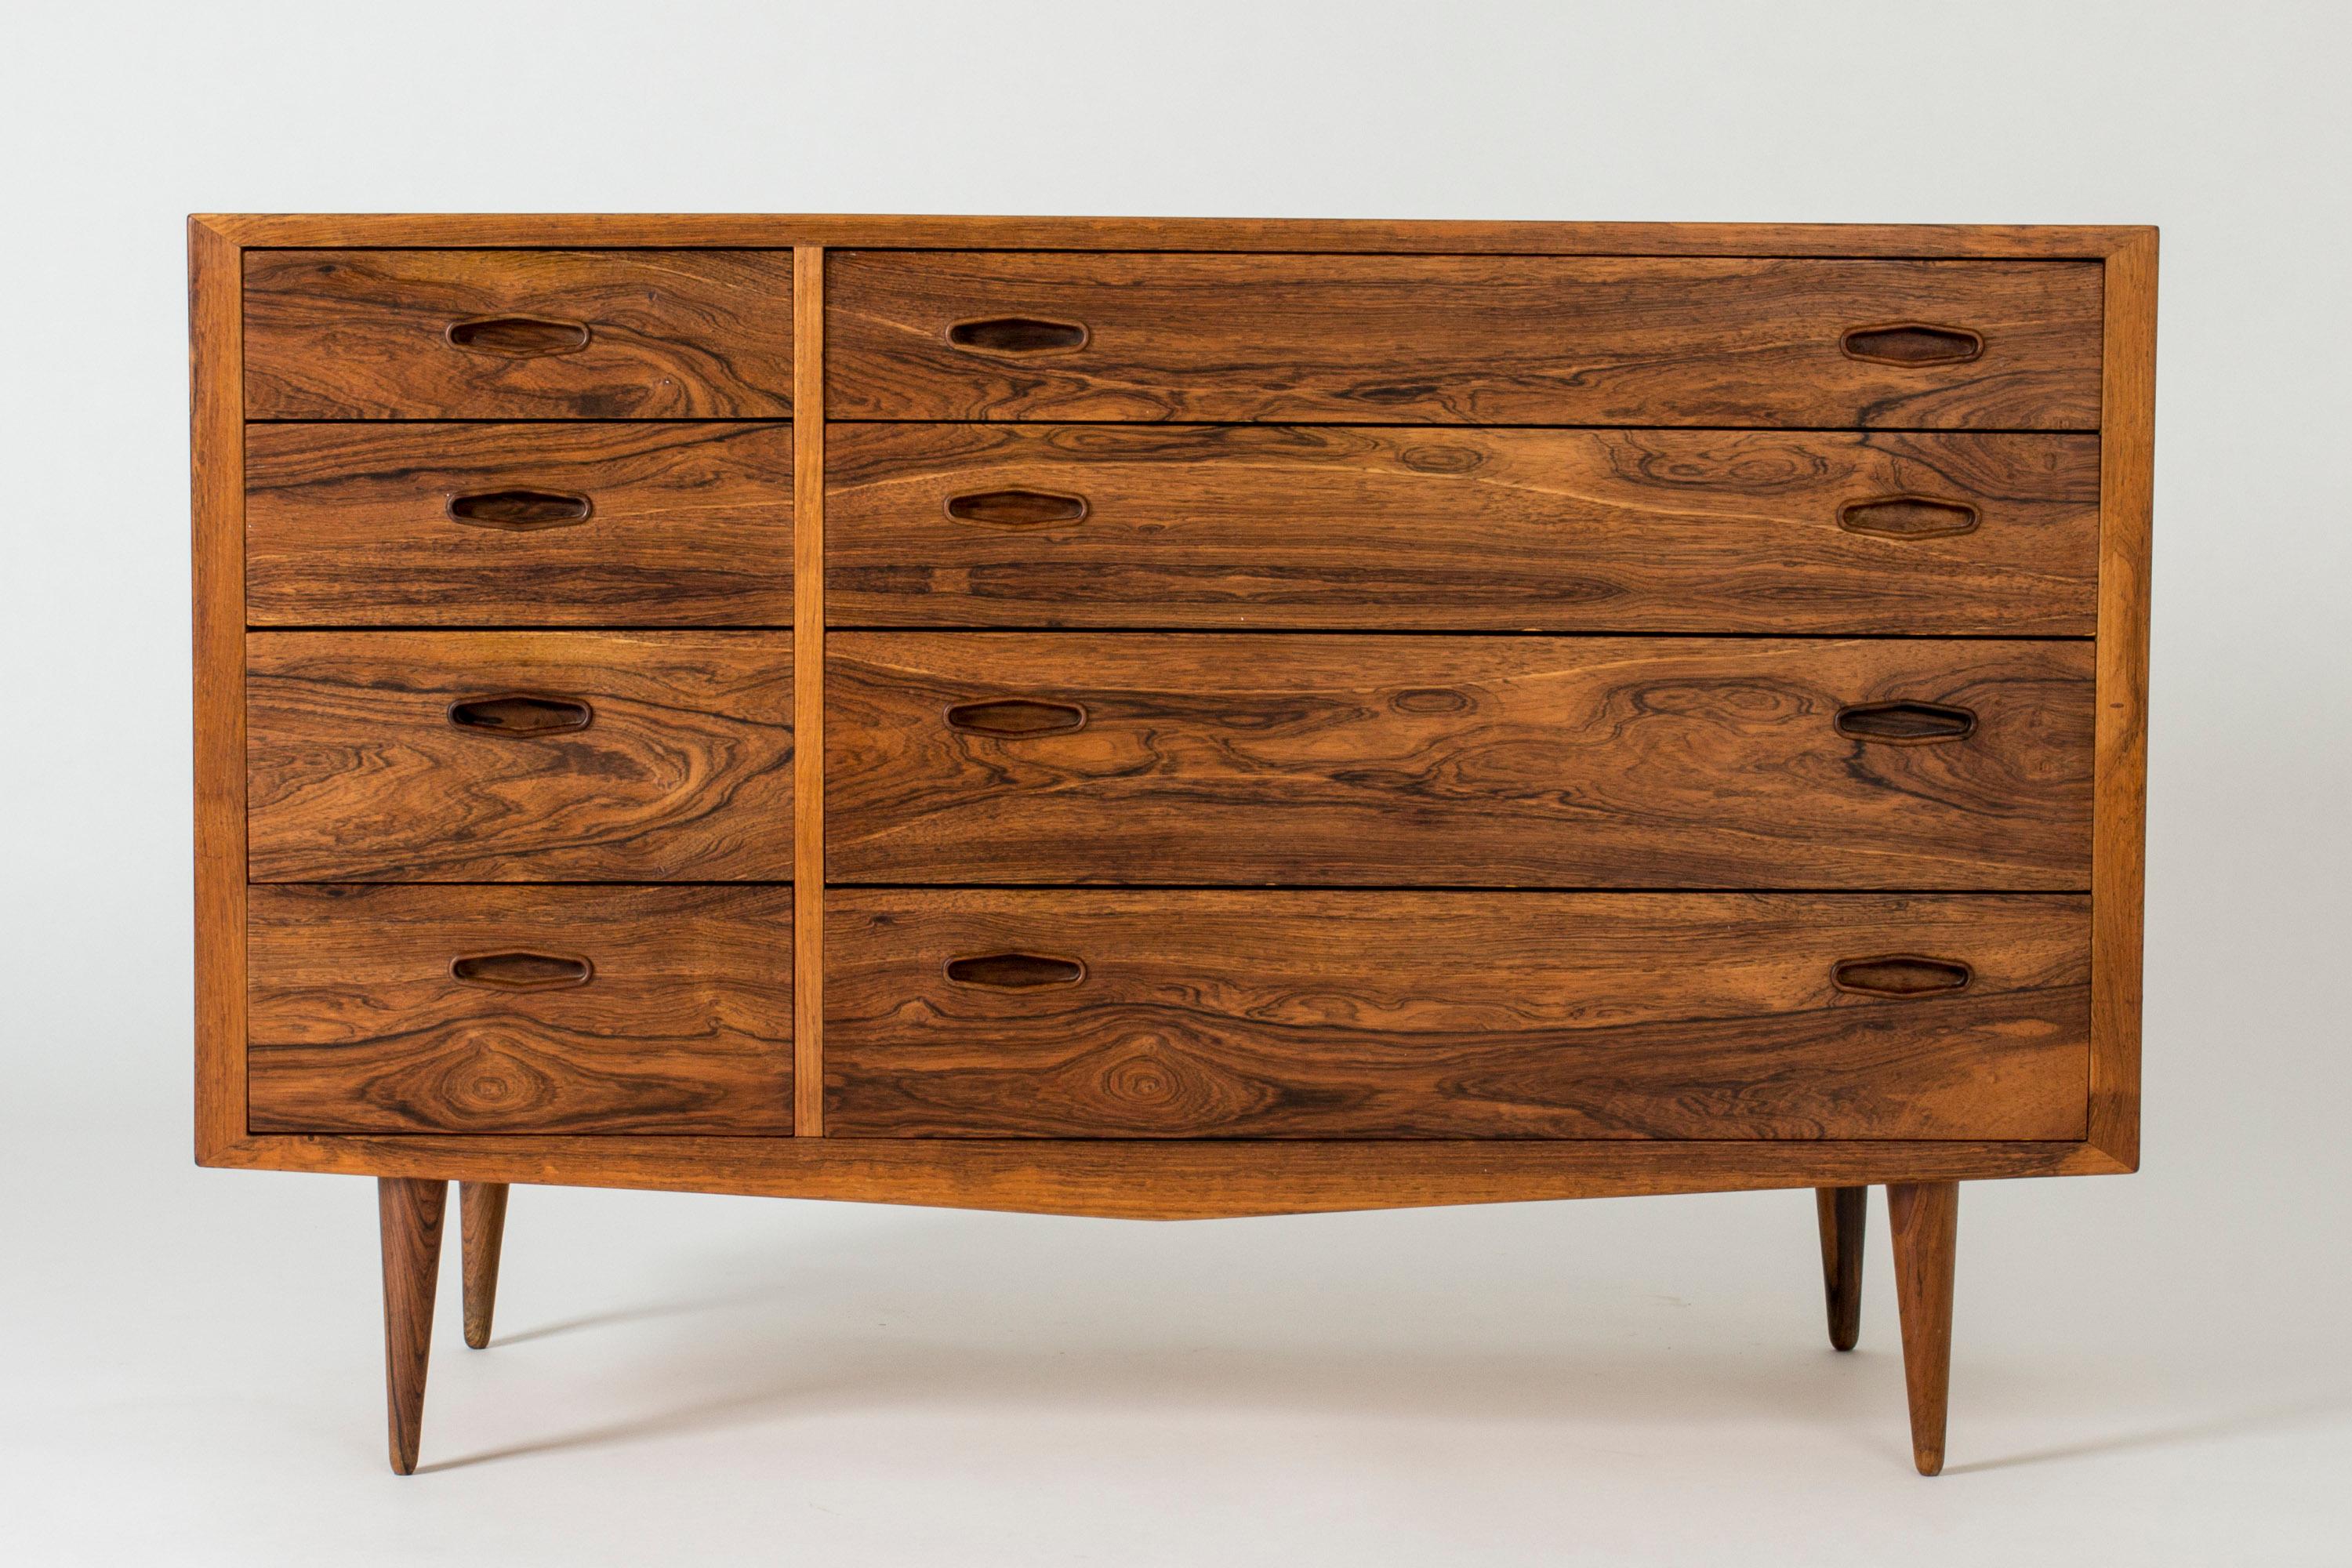 Cool Danish midcentury chest of drawers, made from rosewood with striking woodgrain. Clean, graphic lines.